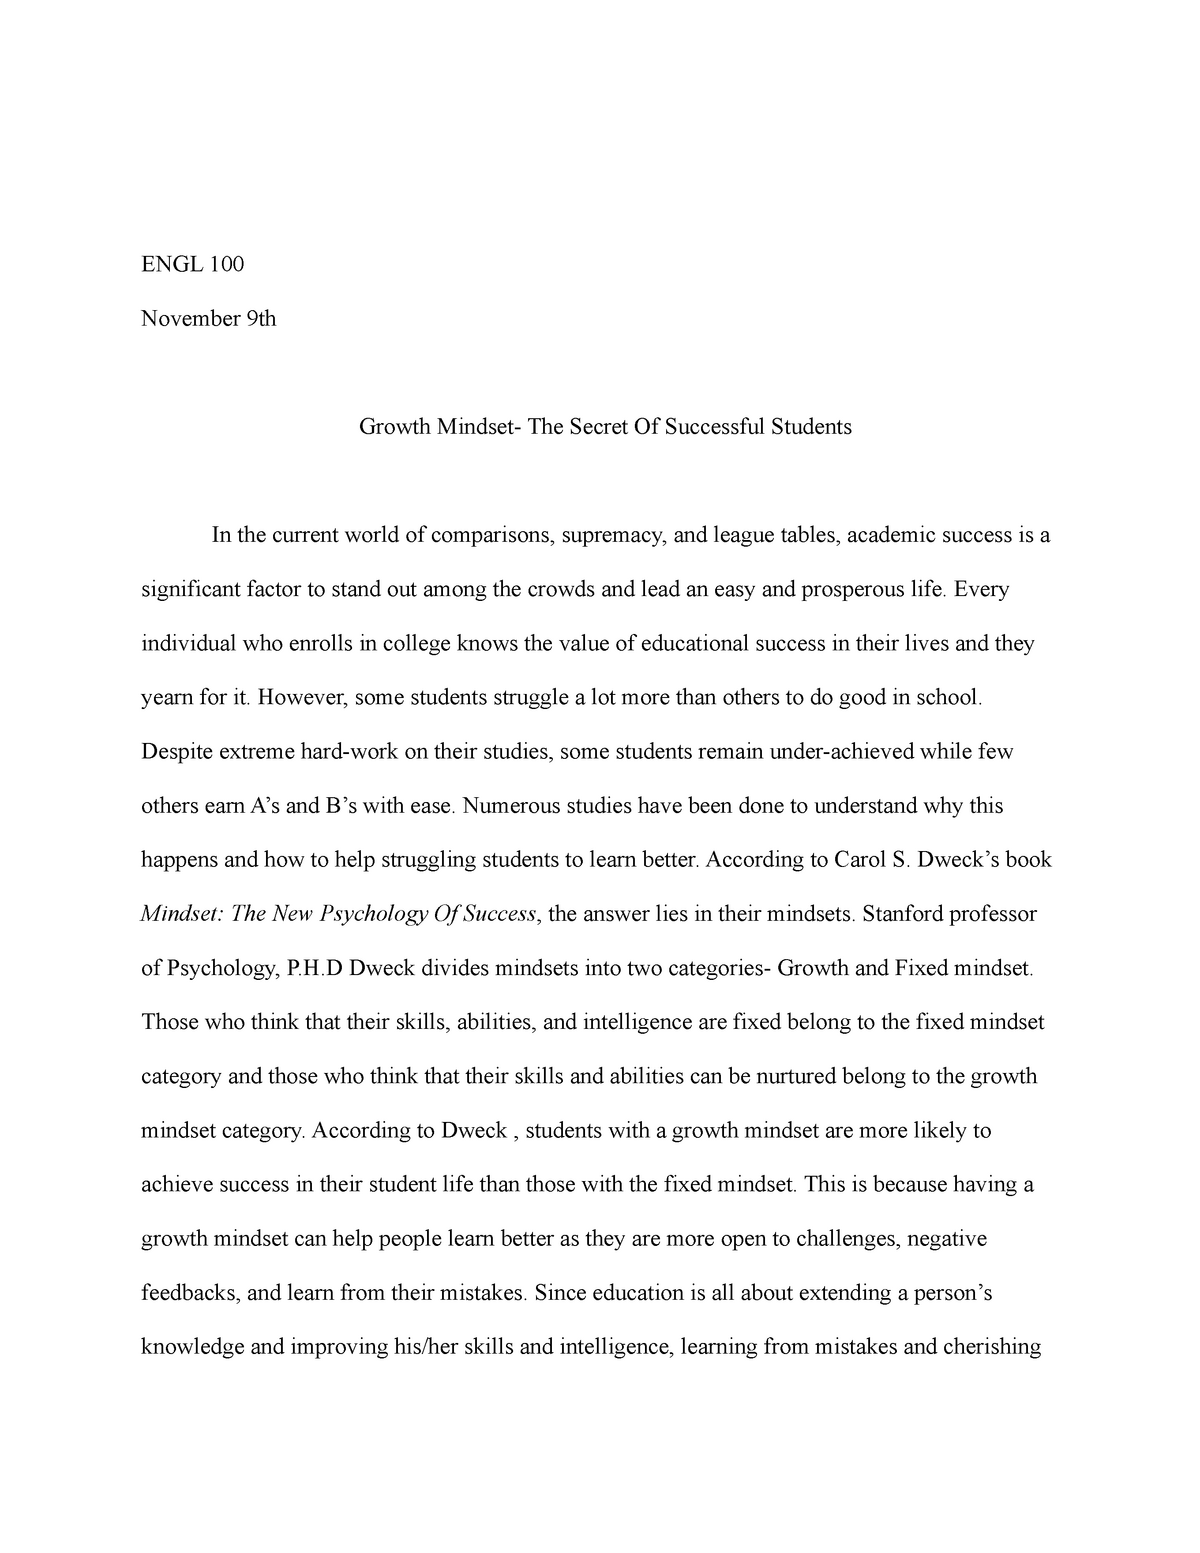 write an essay on the growth of english vocabulary